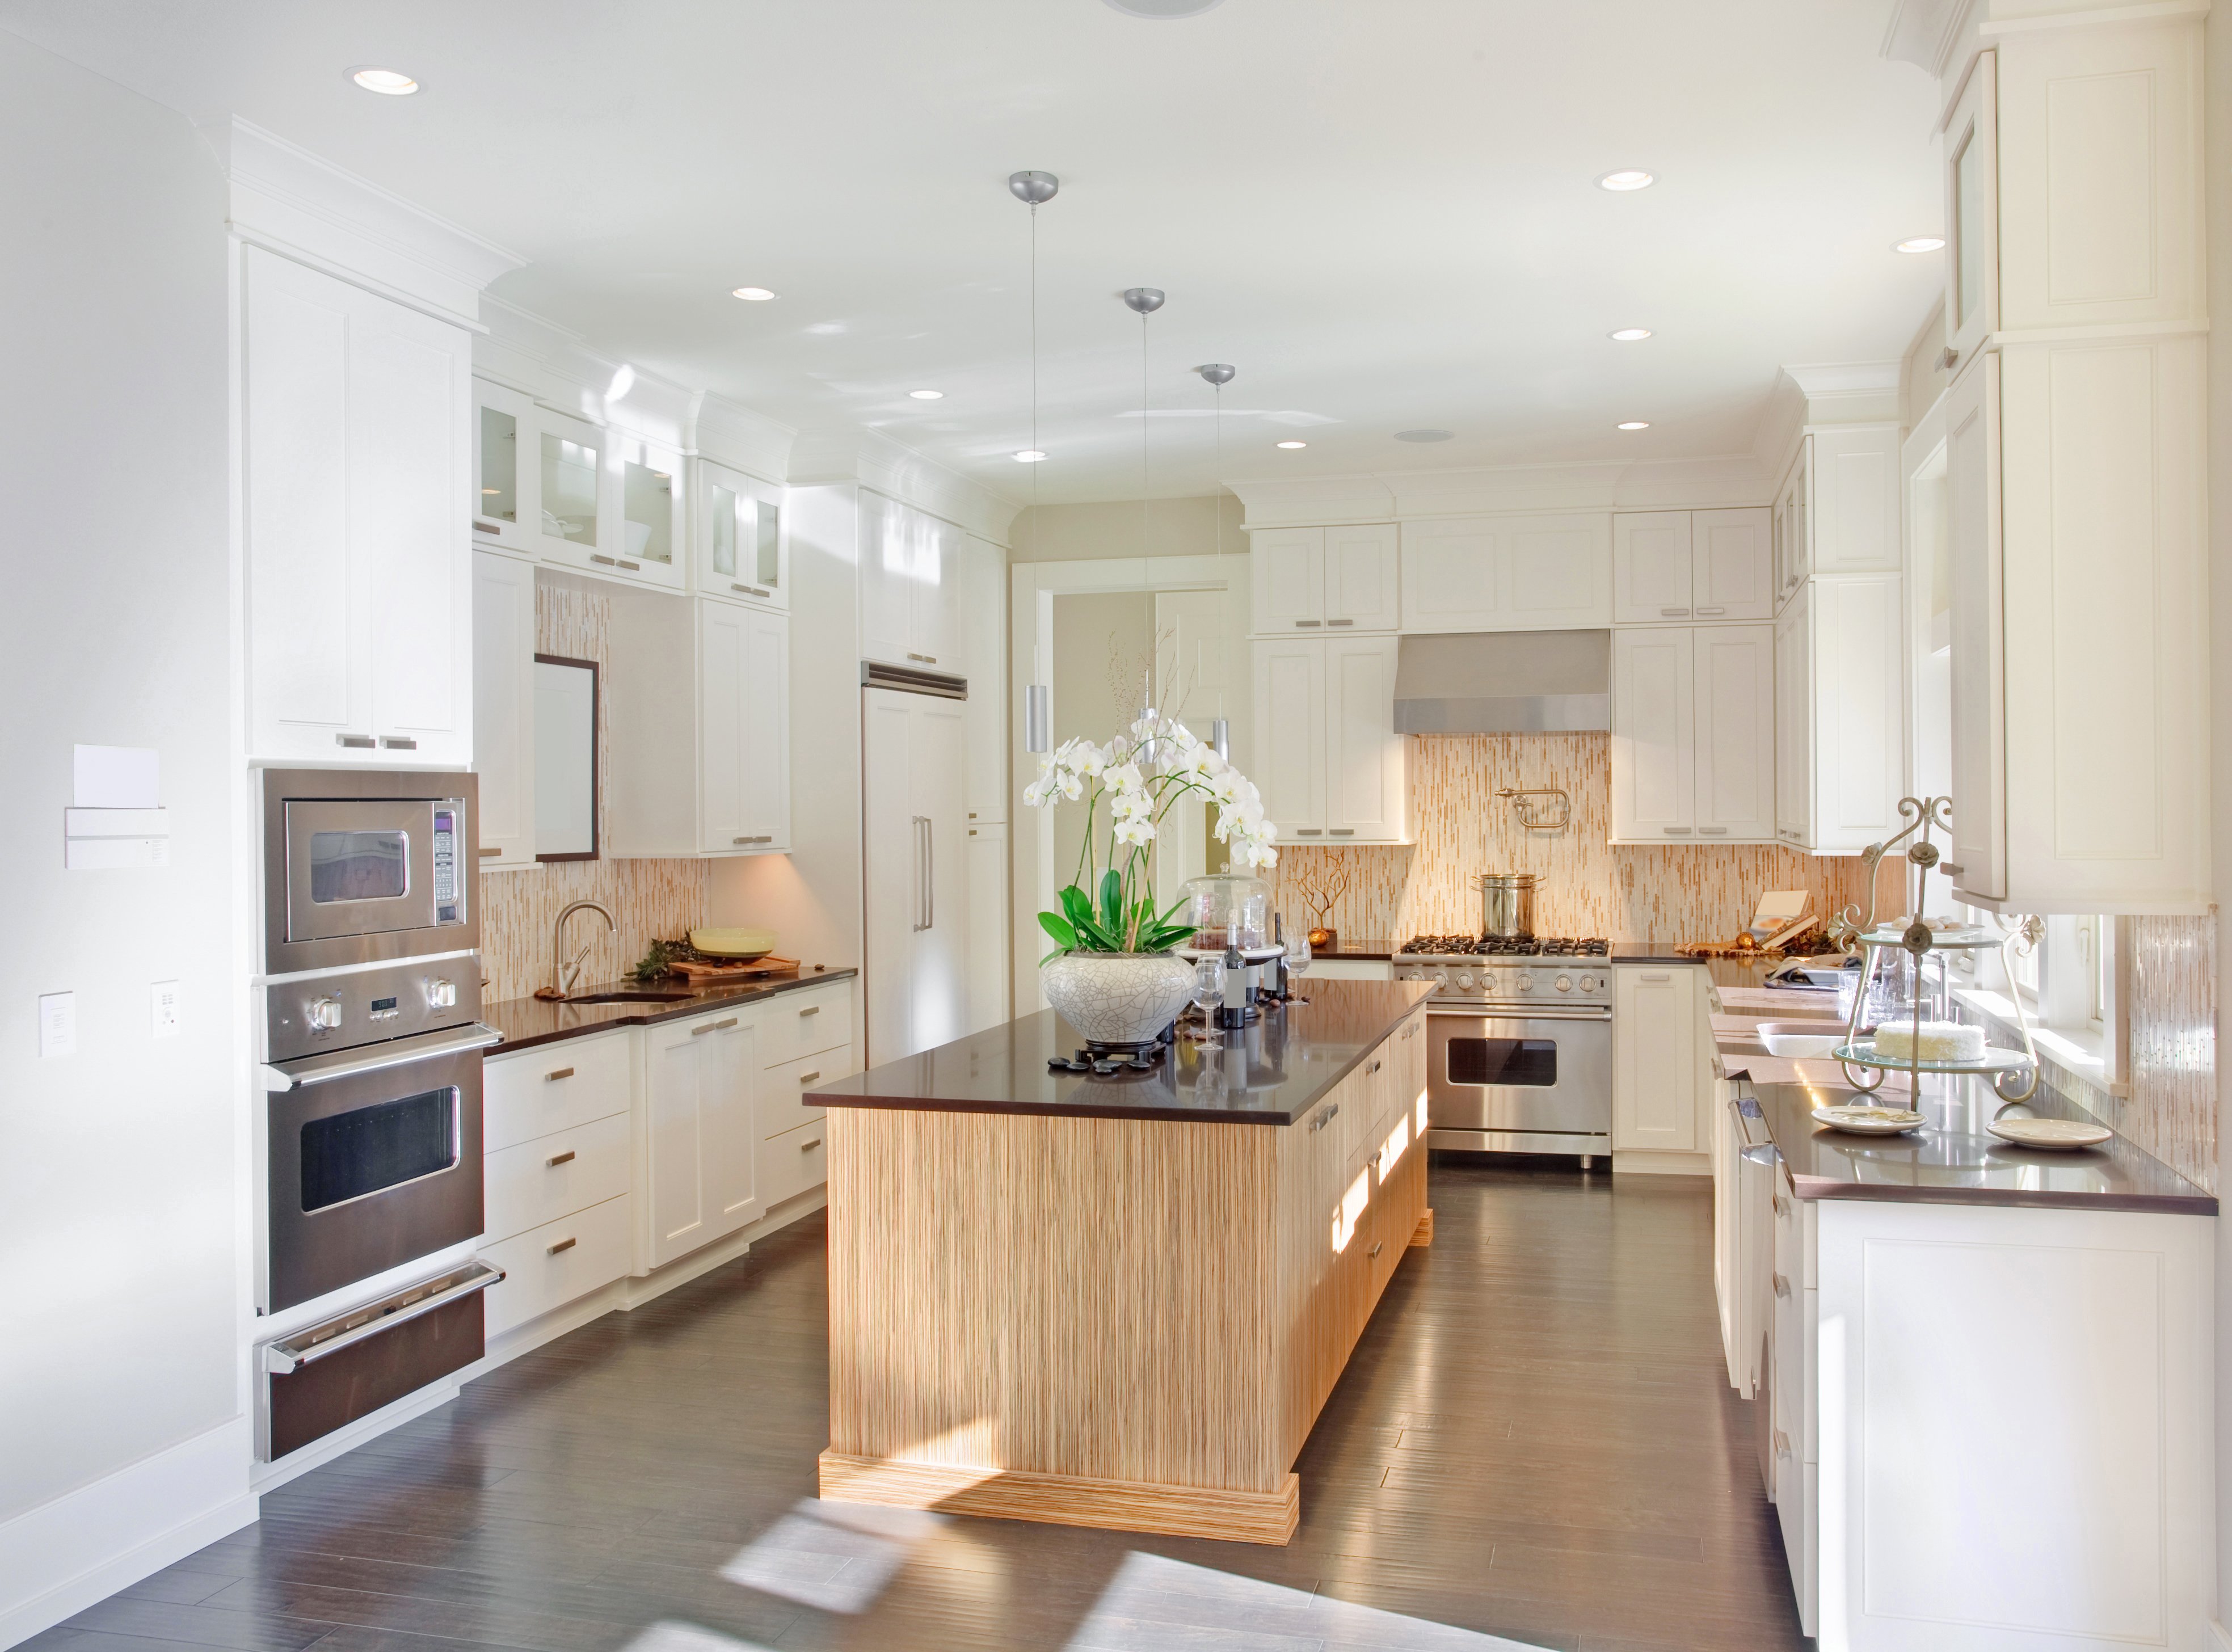 Kitchen remodeling with radiant heat